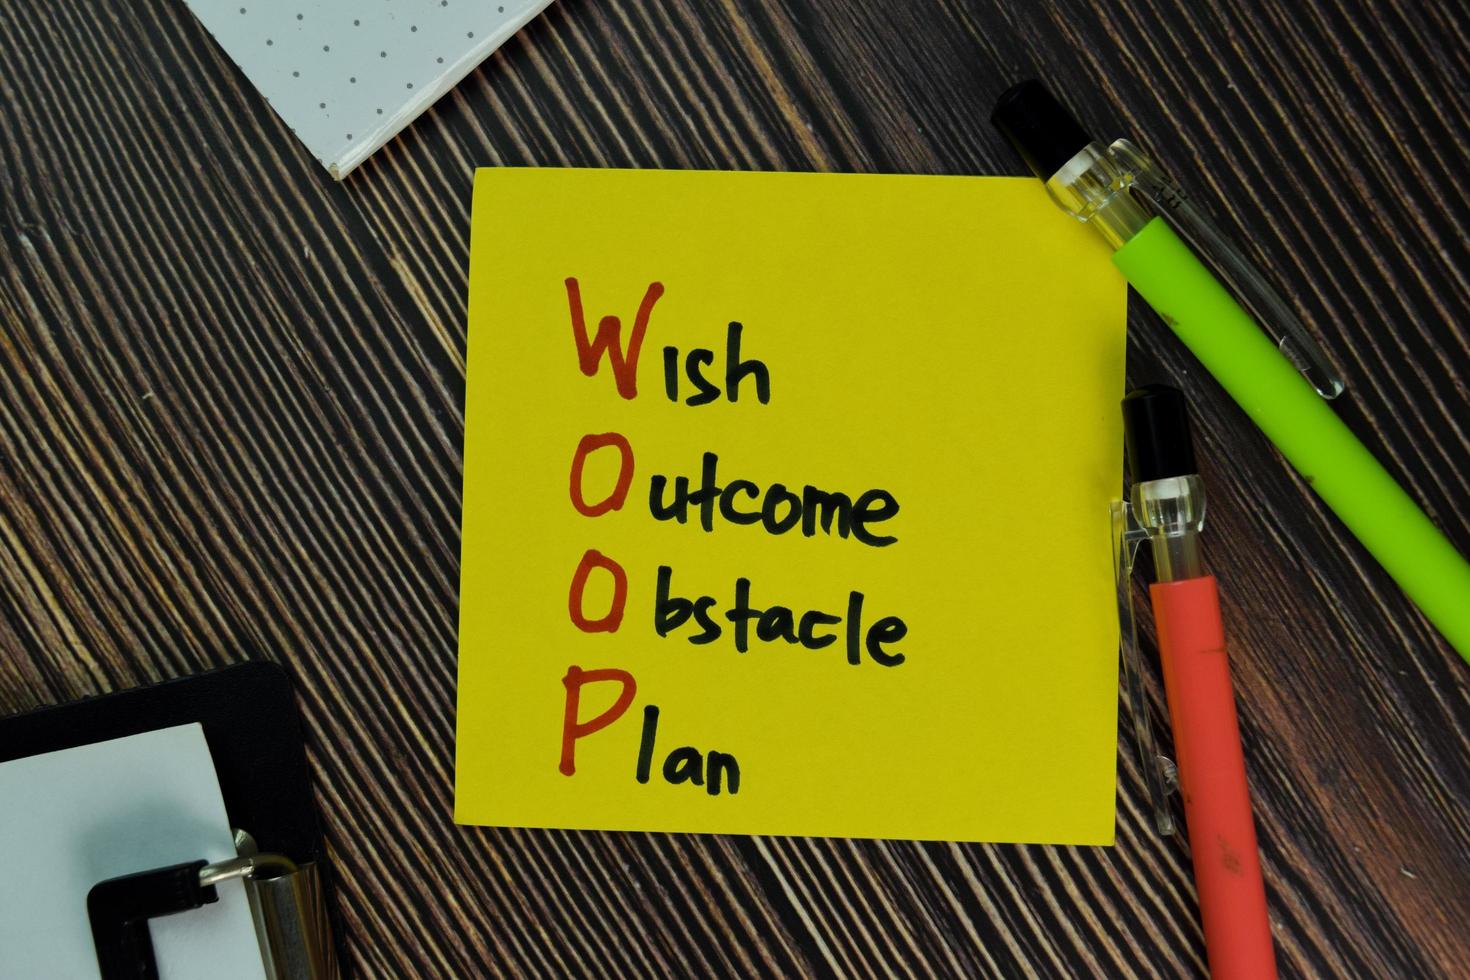 WOOP - Wish Outcome Obstacle Plan written on a paperwork isolated on wooden table photo